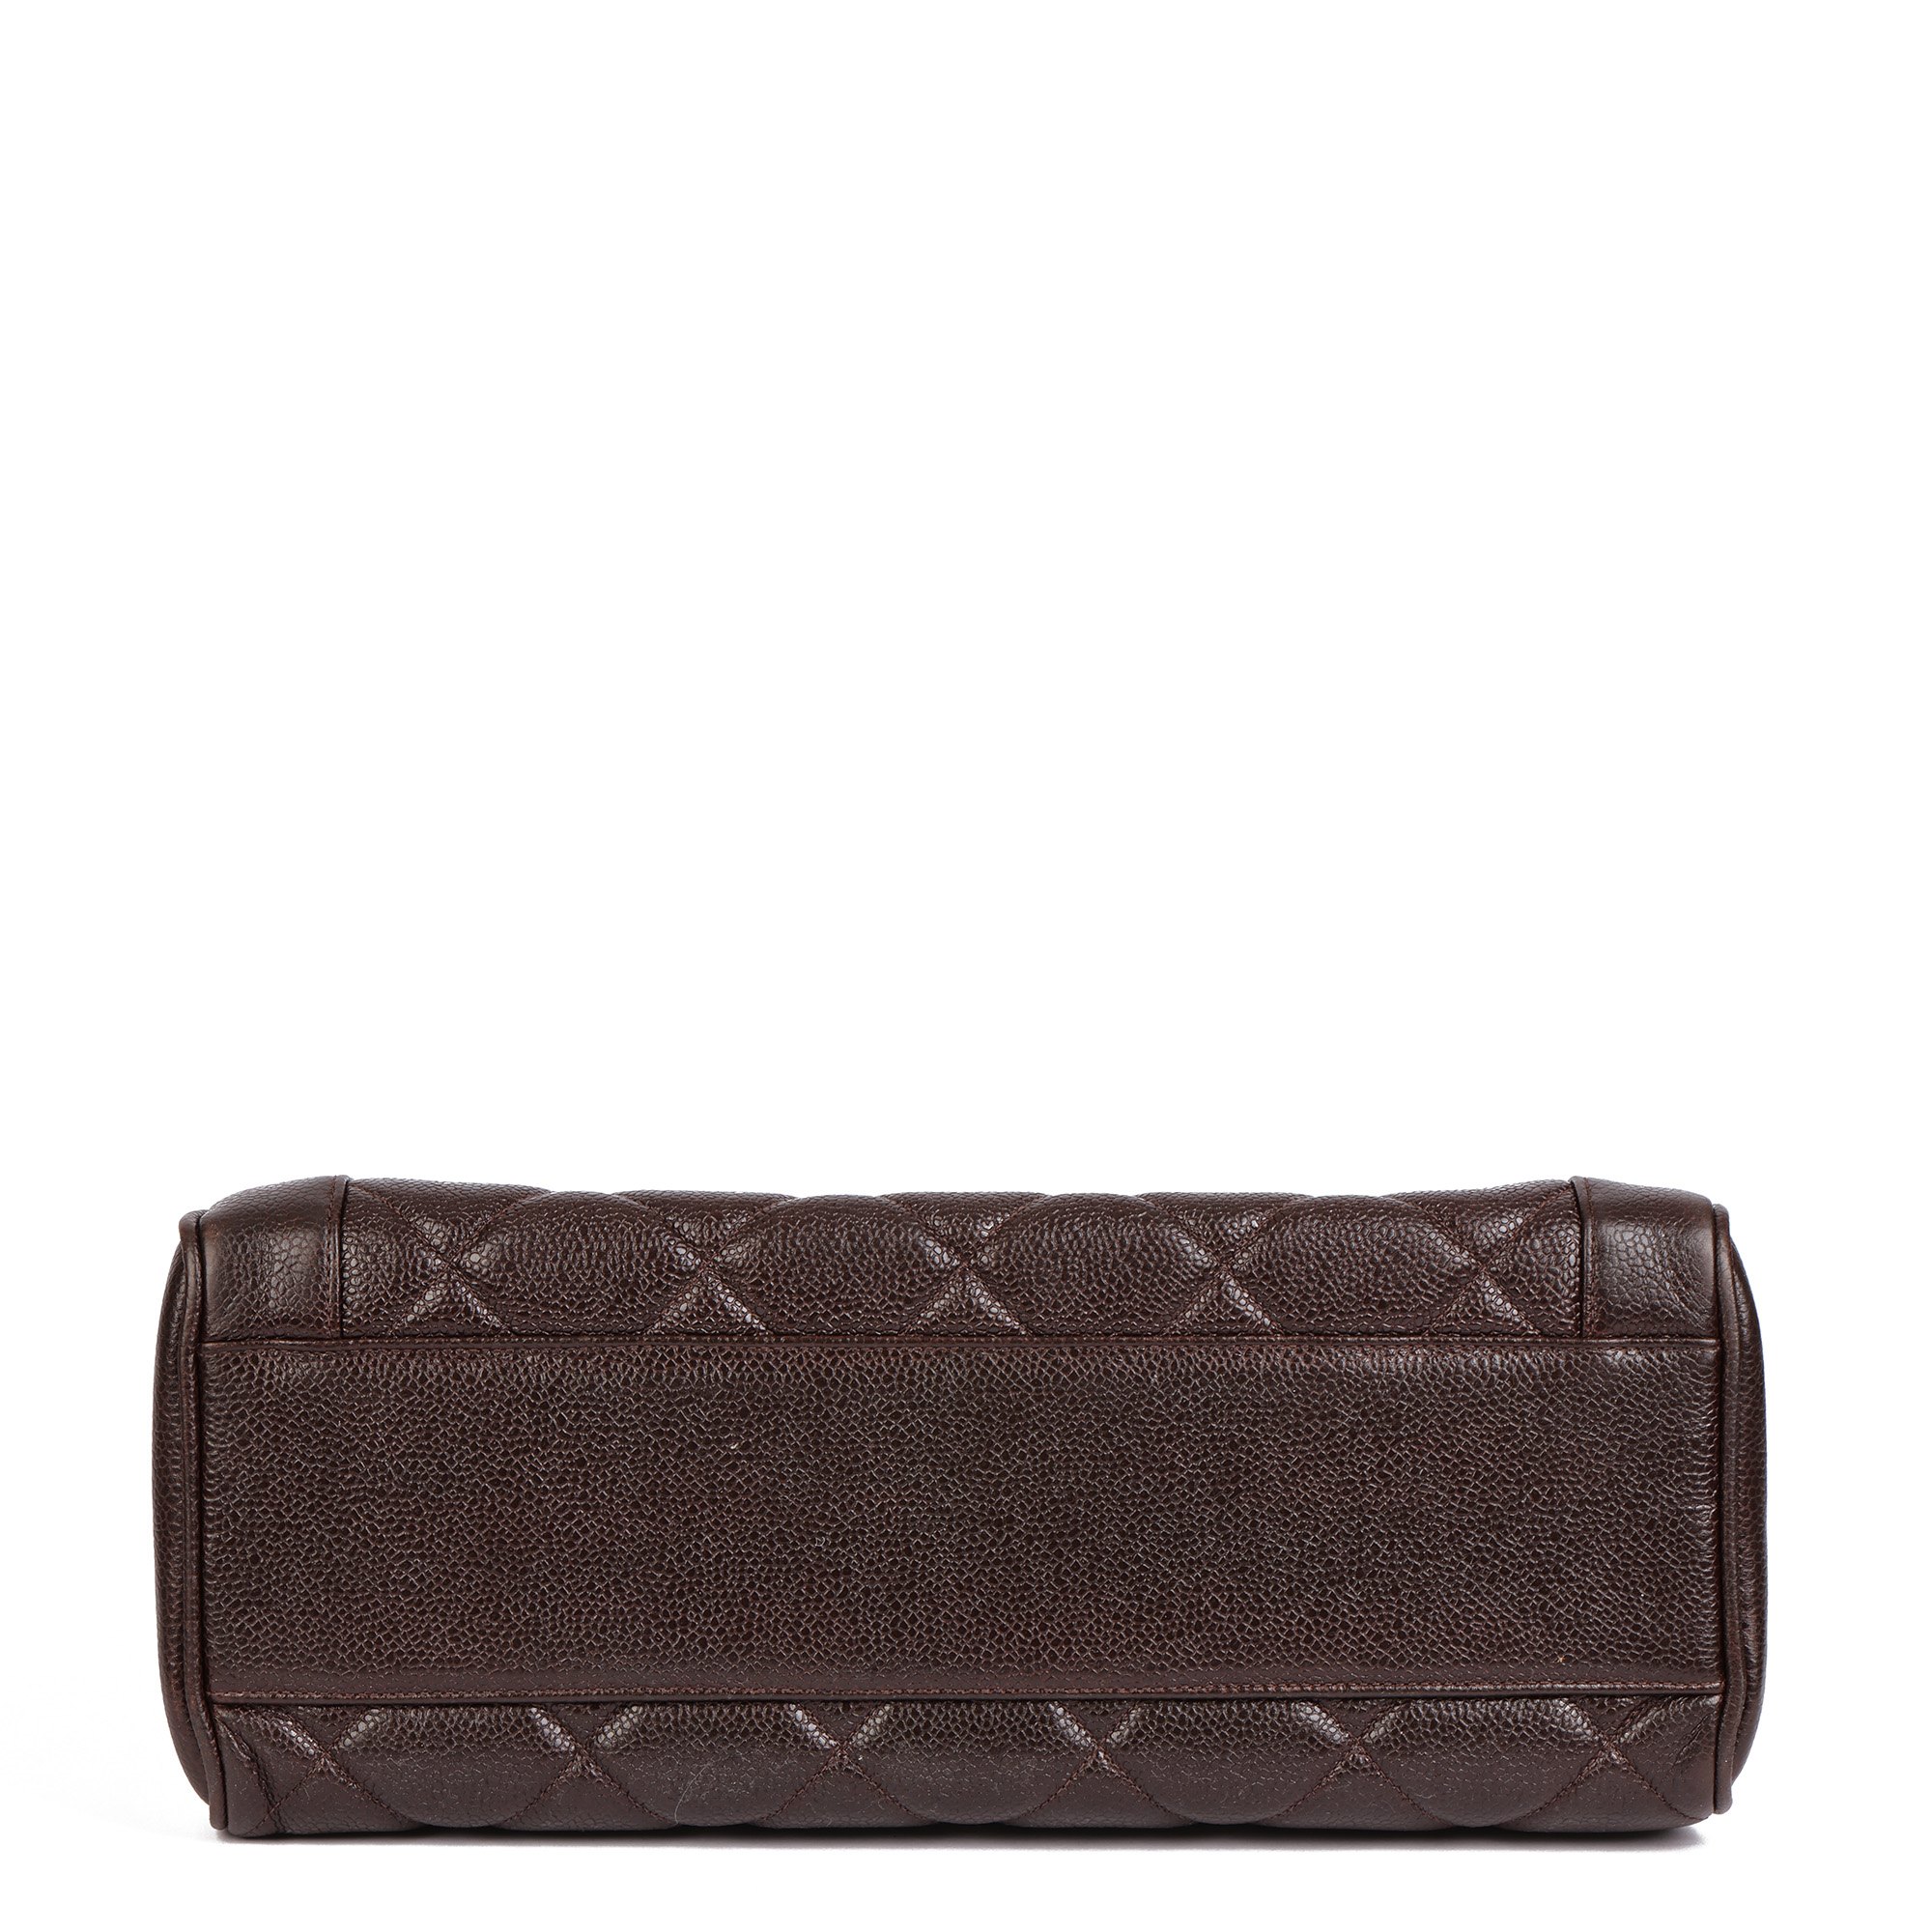 Chanel Chocolate Brown Quilted Caviar Leather Vintage Classic Kelly